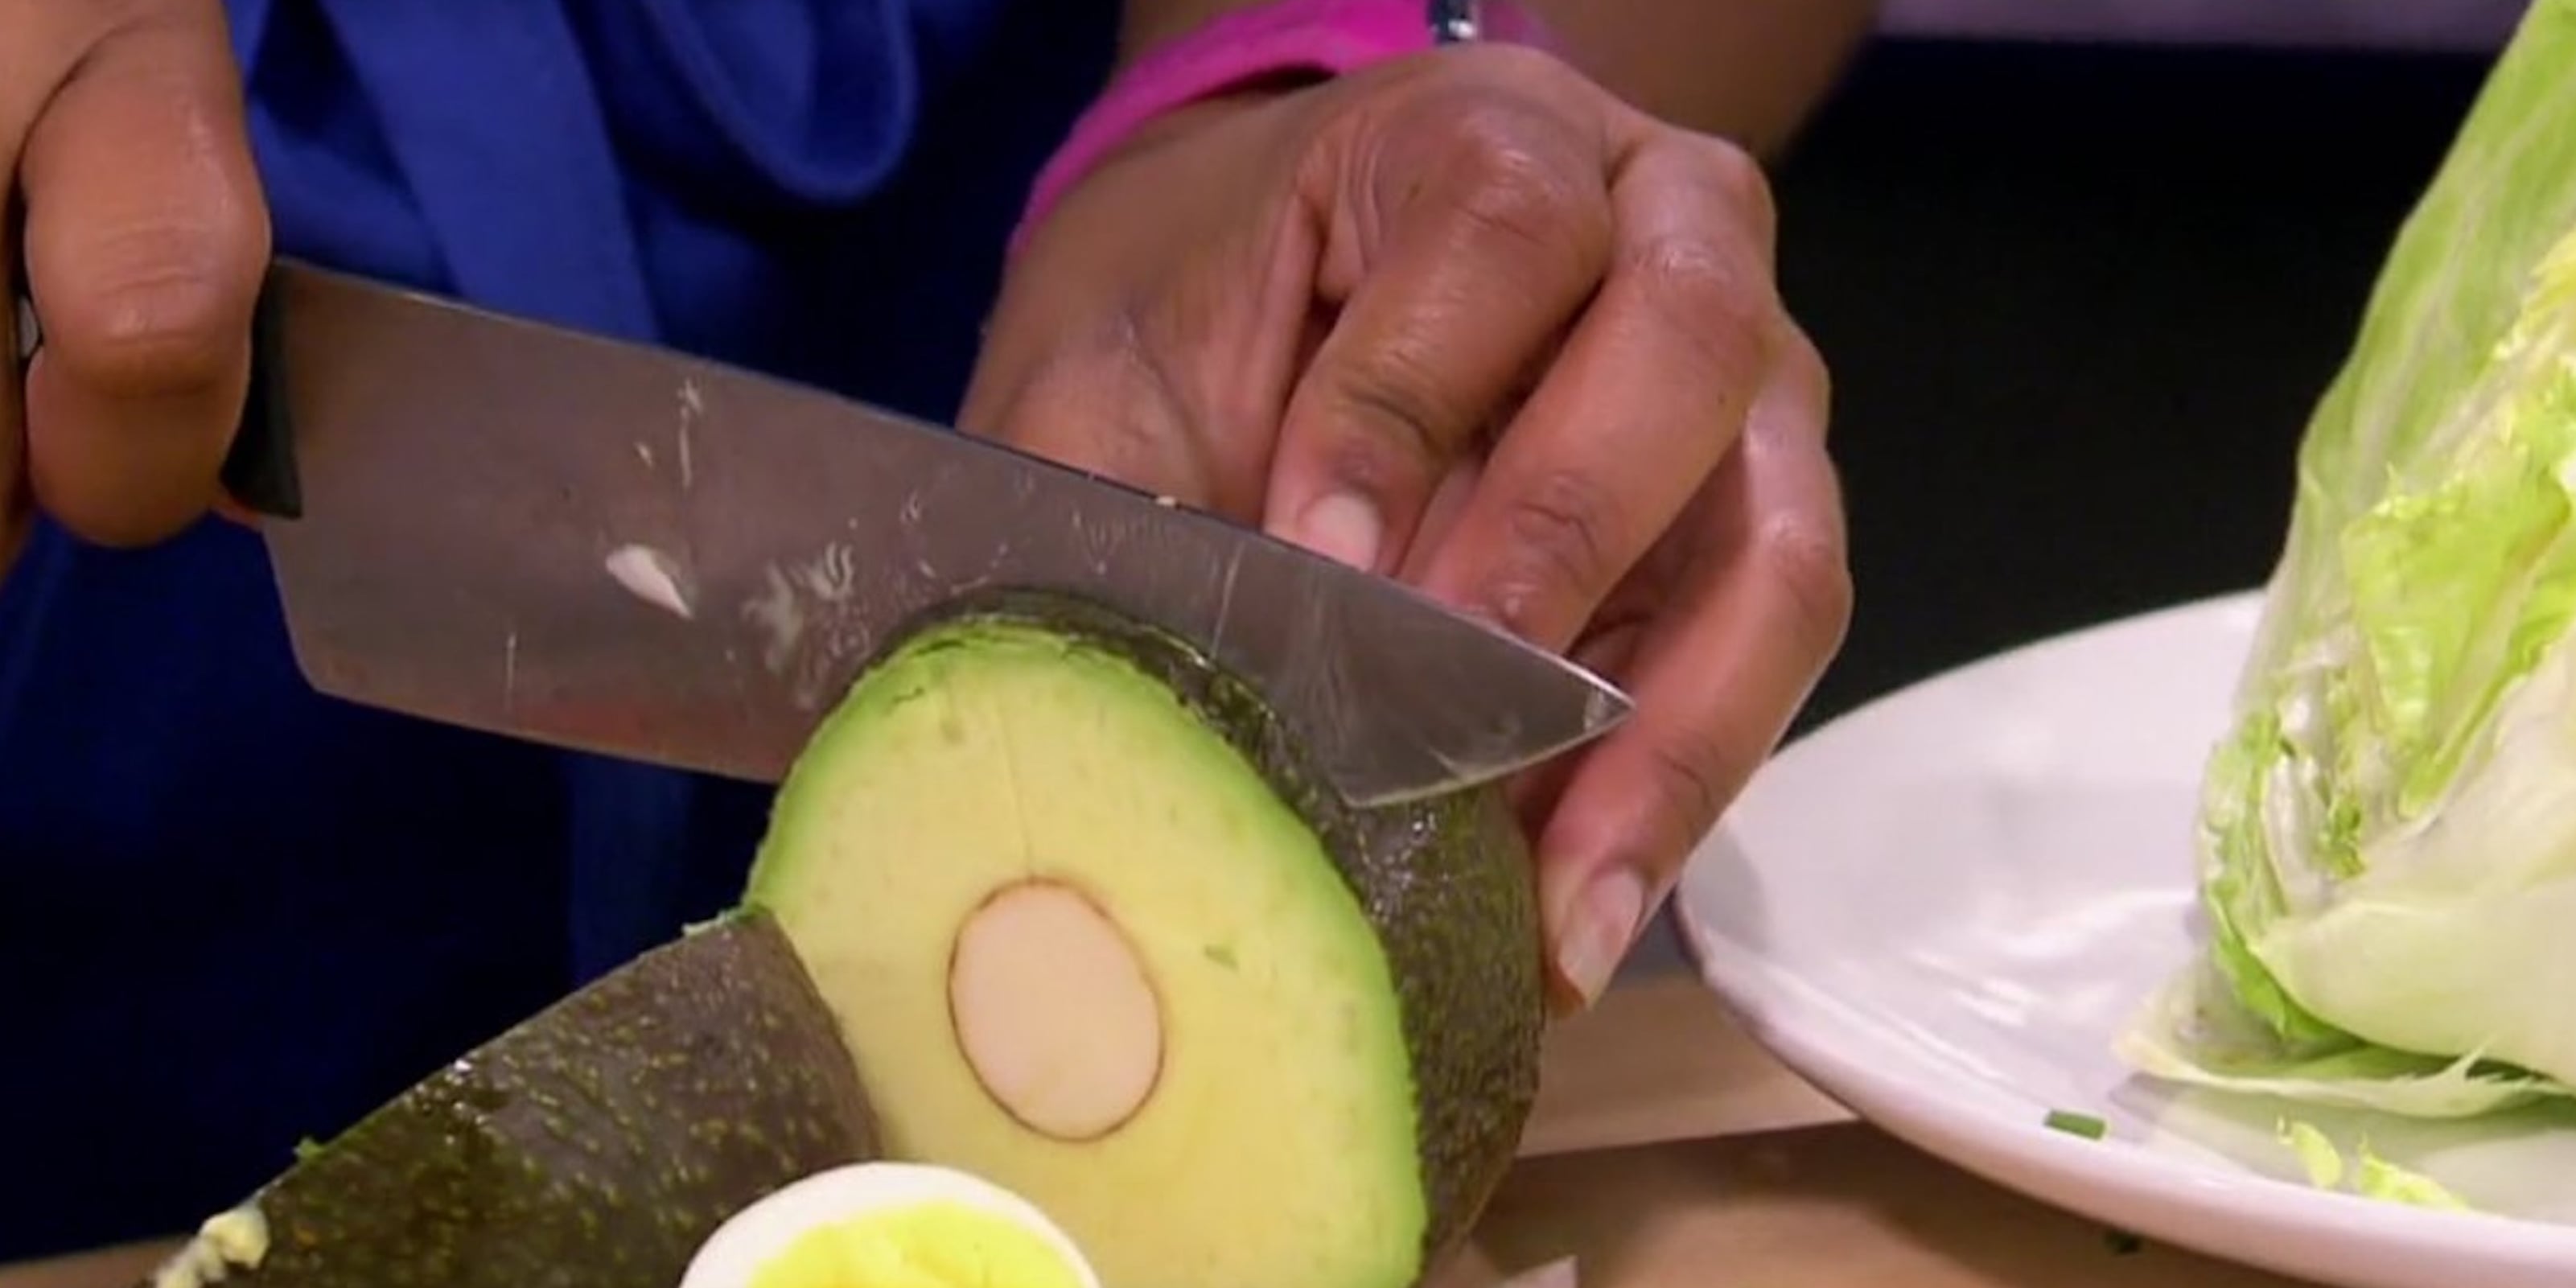 How to Cut an Avocado, Cooking School